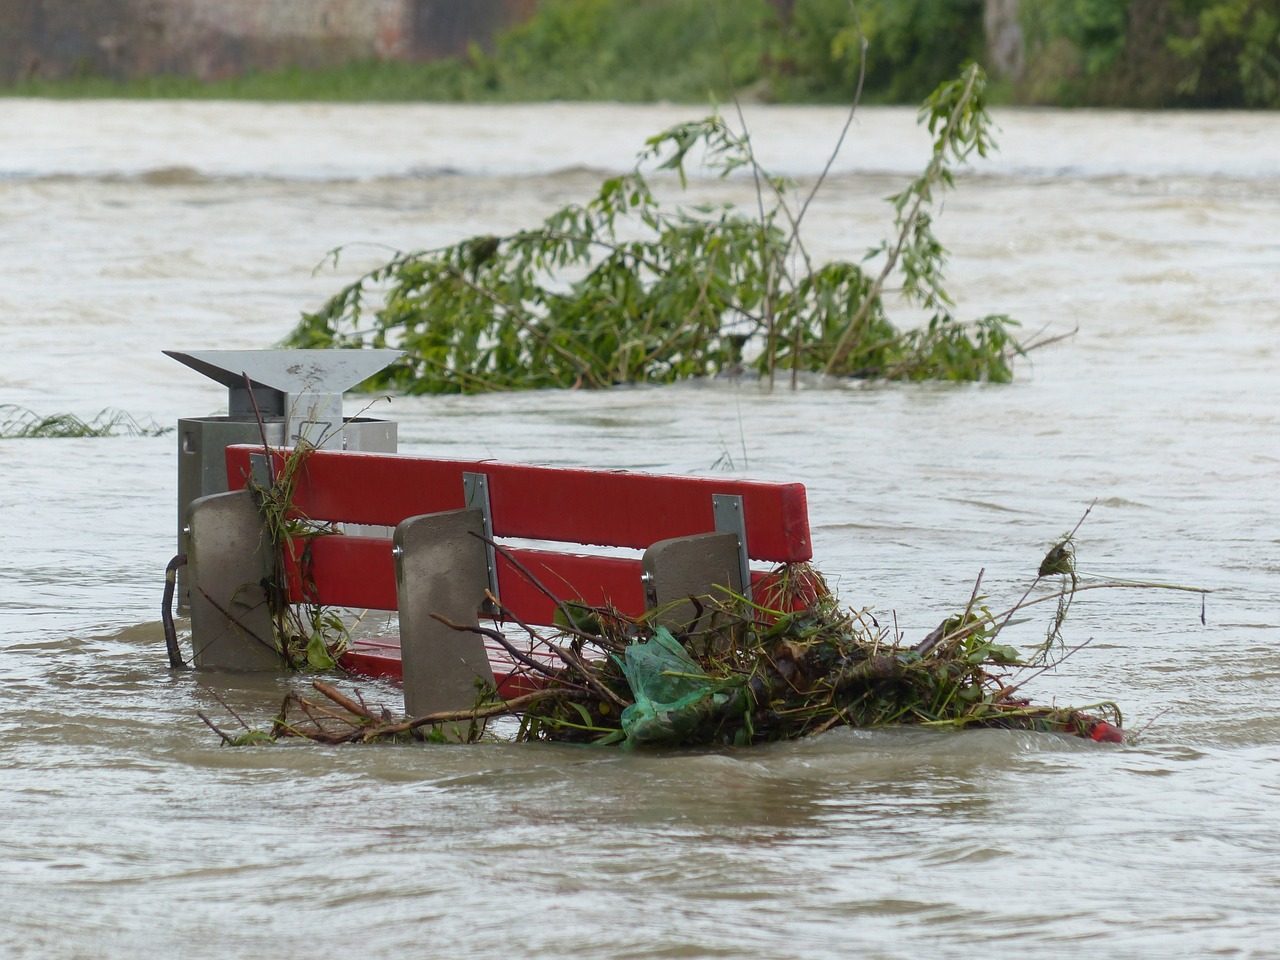 Floods with bench. The climate emergency is causing concern with political leaders.